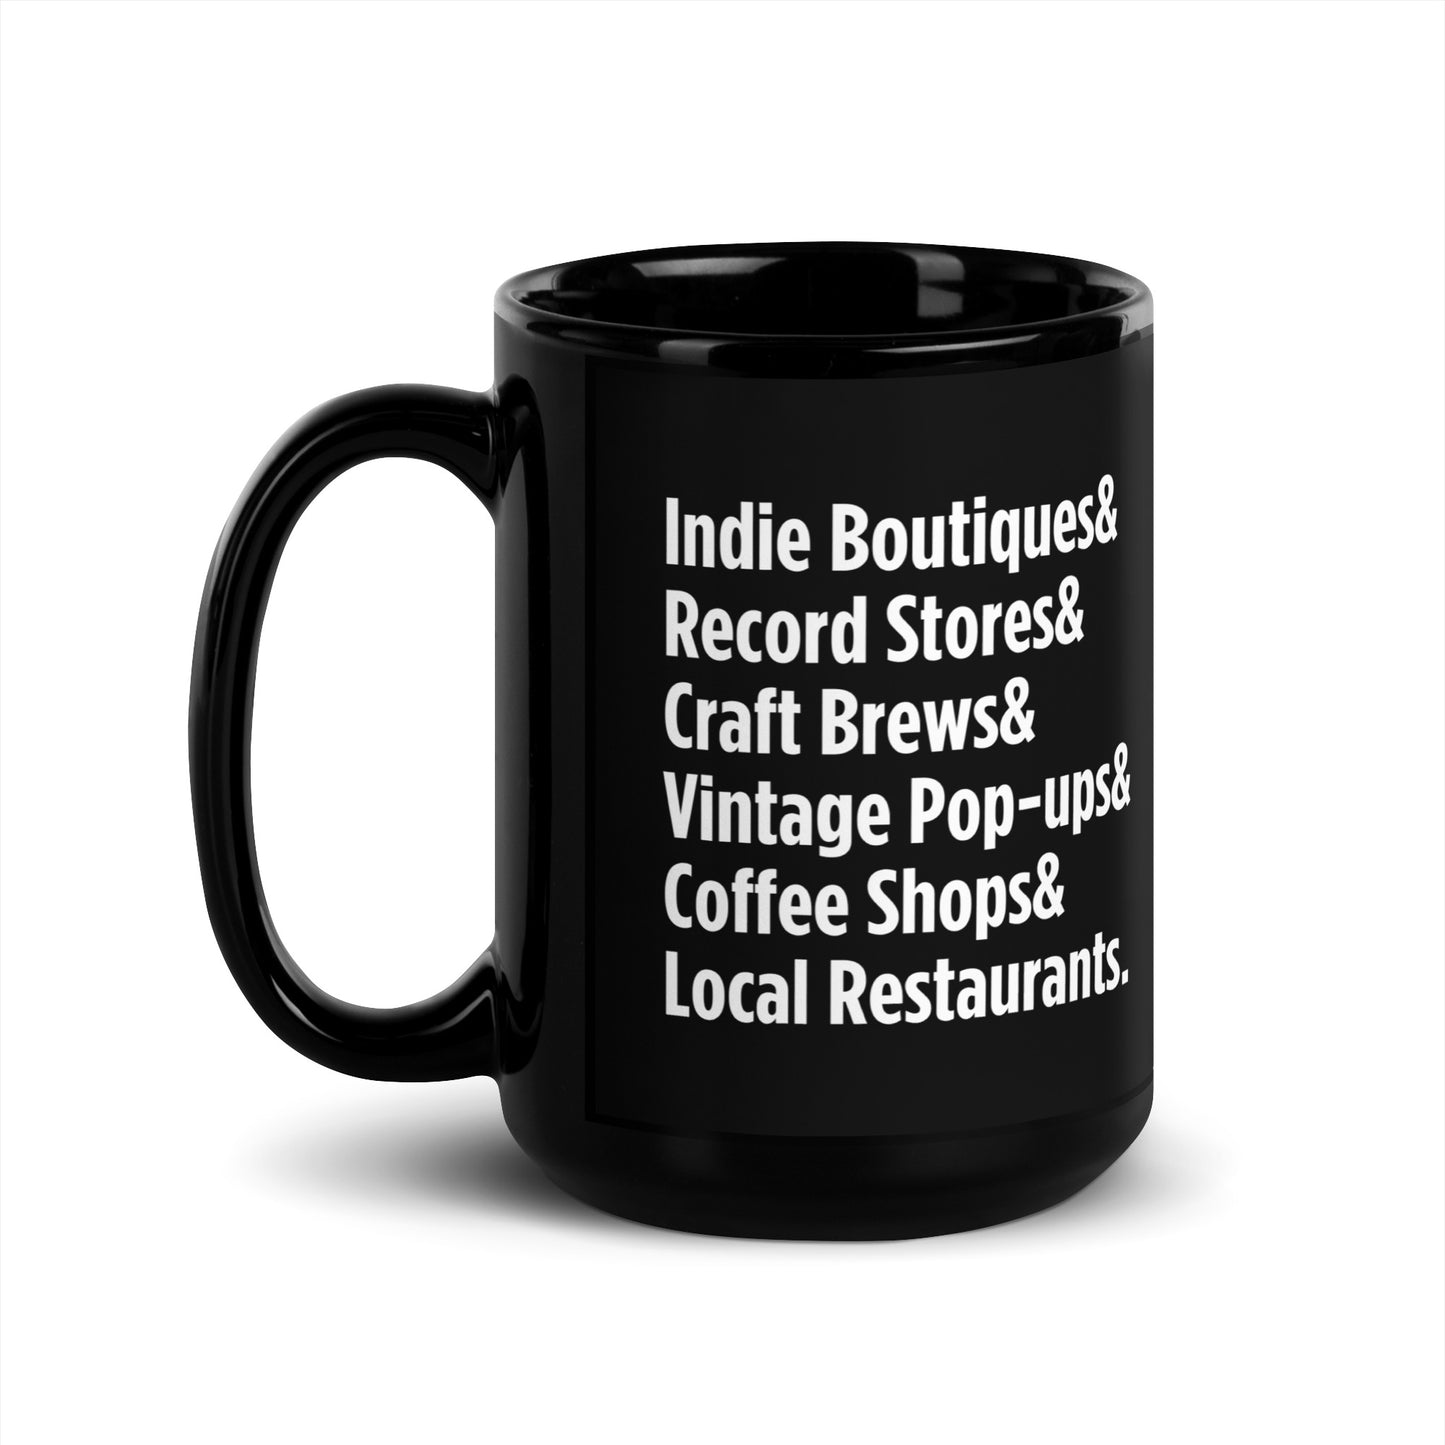 "Only on Main Street" (Small Businesses) Black Glossy Mug